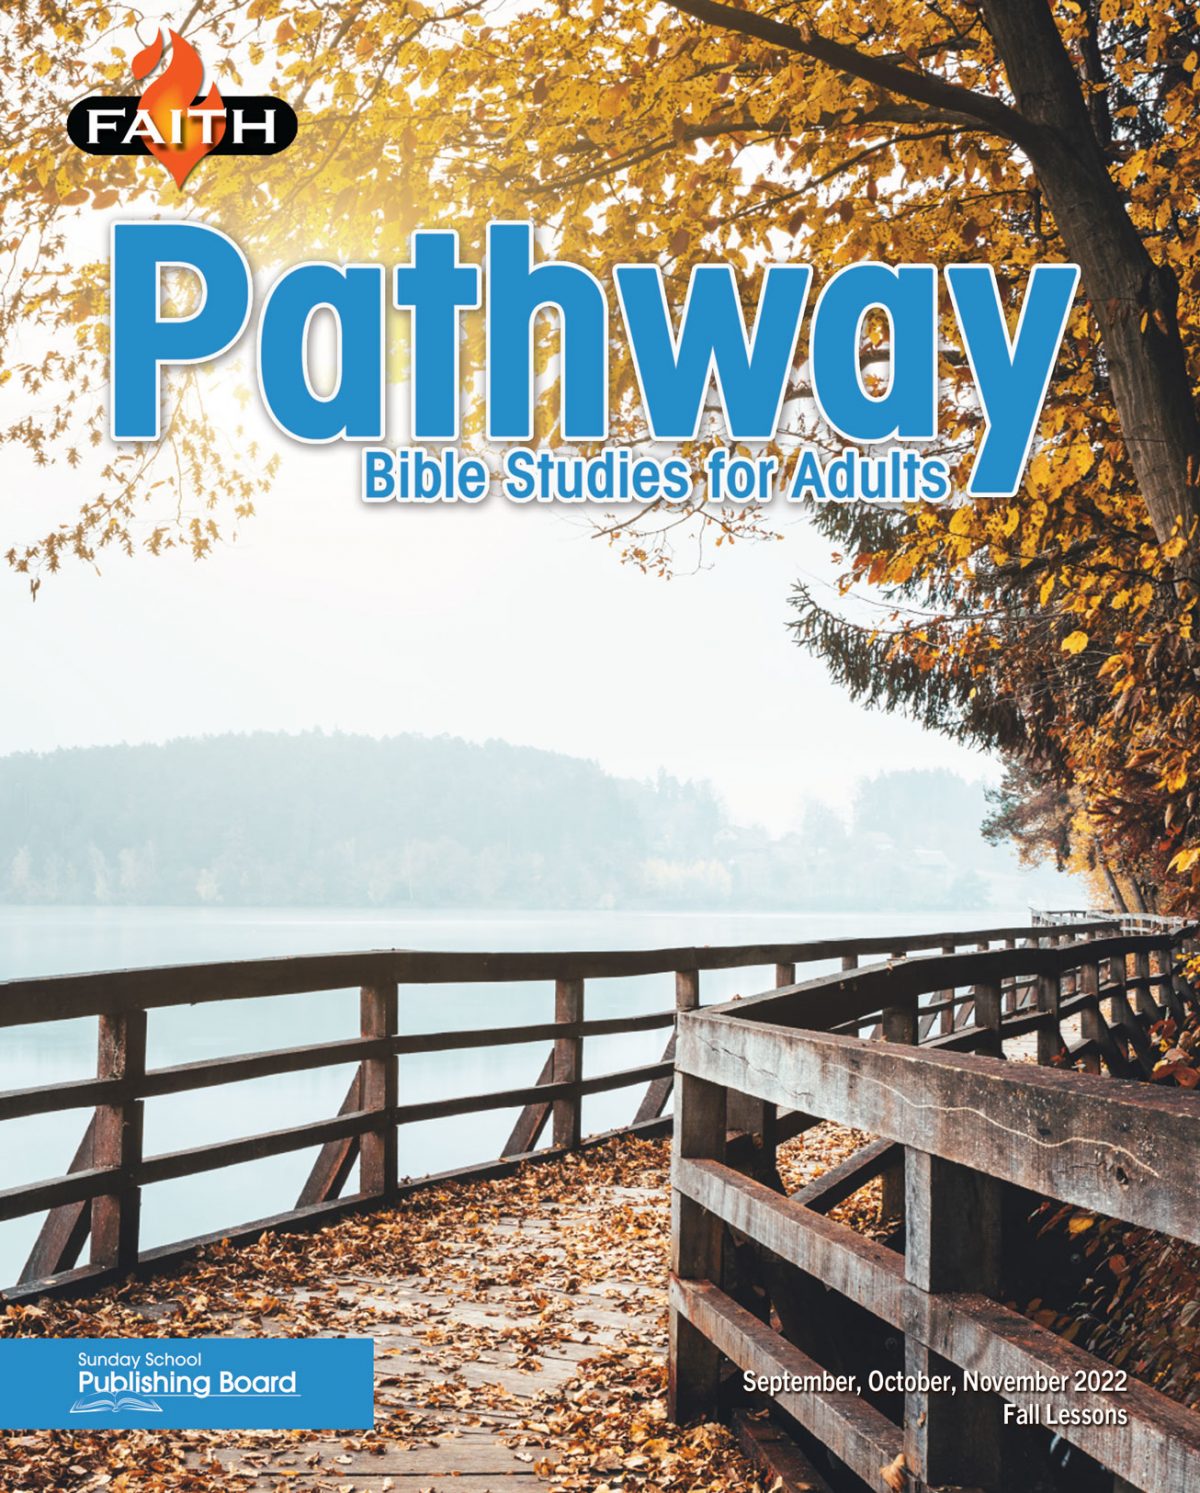 Faith Pathway Bible Studies for Adults (Large Print) (Fall 2022